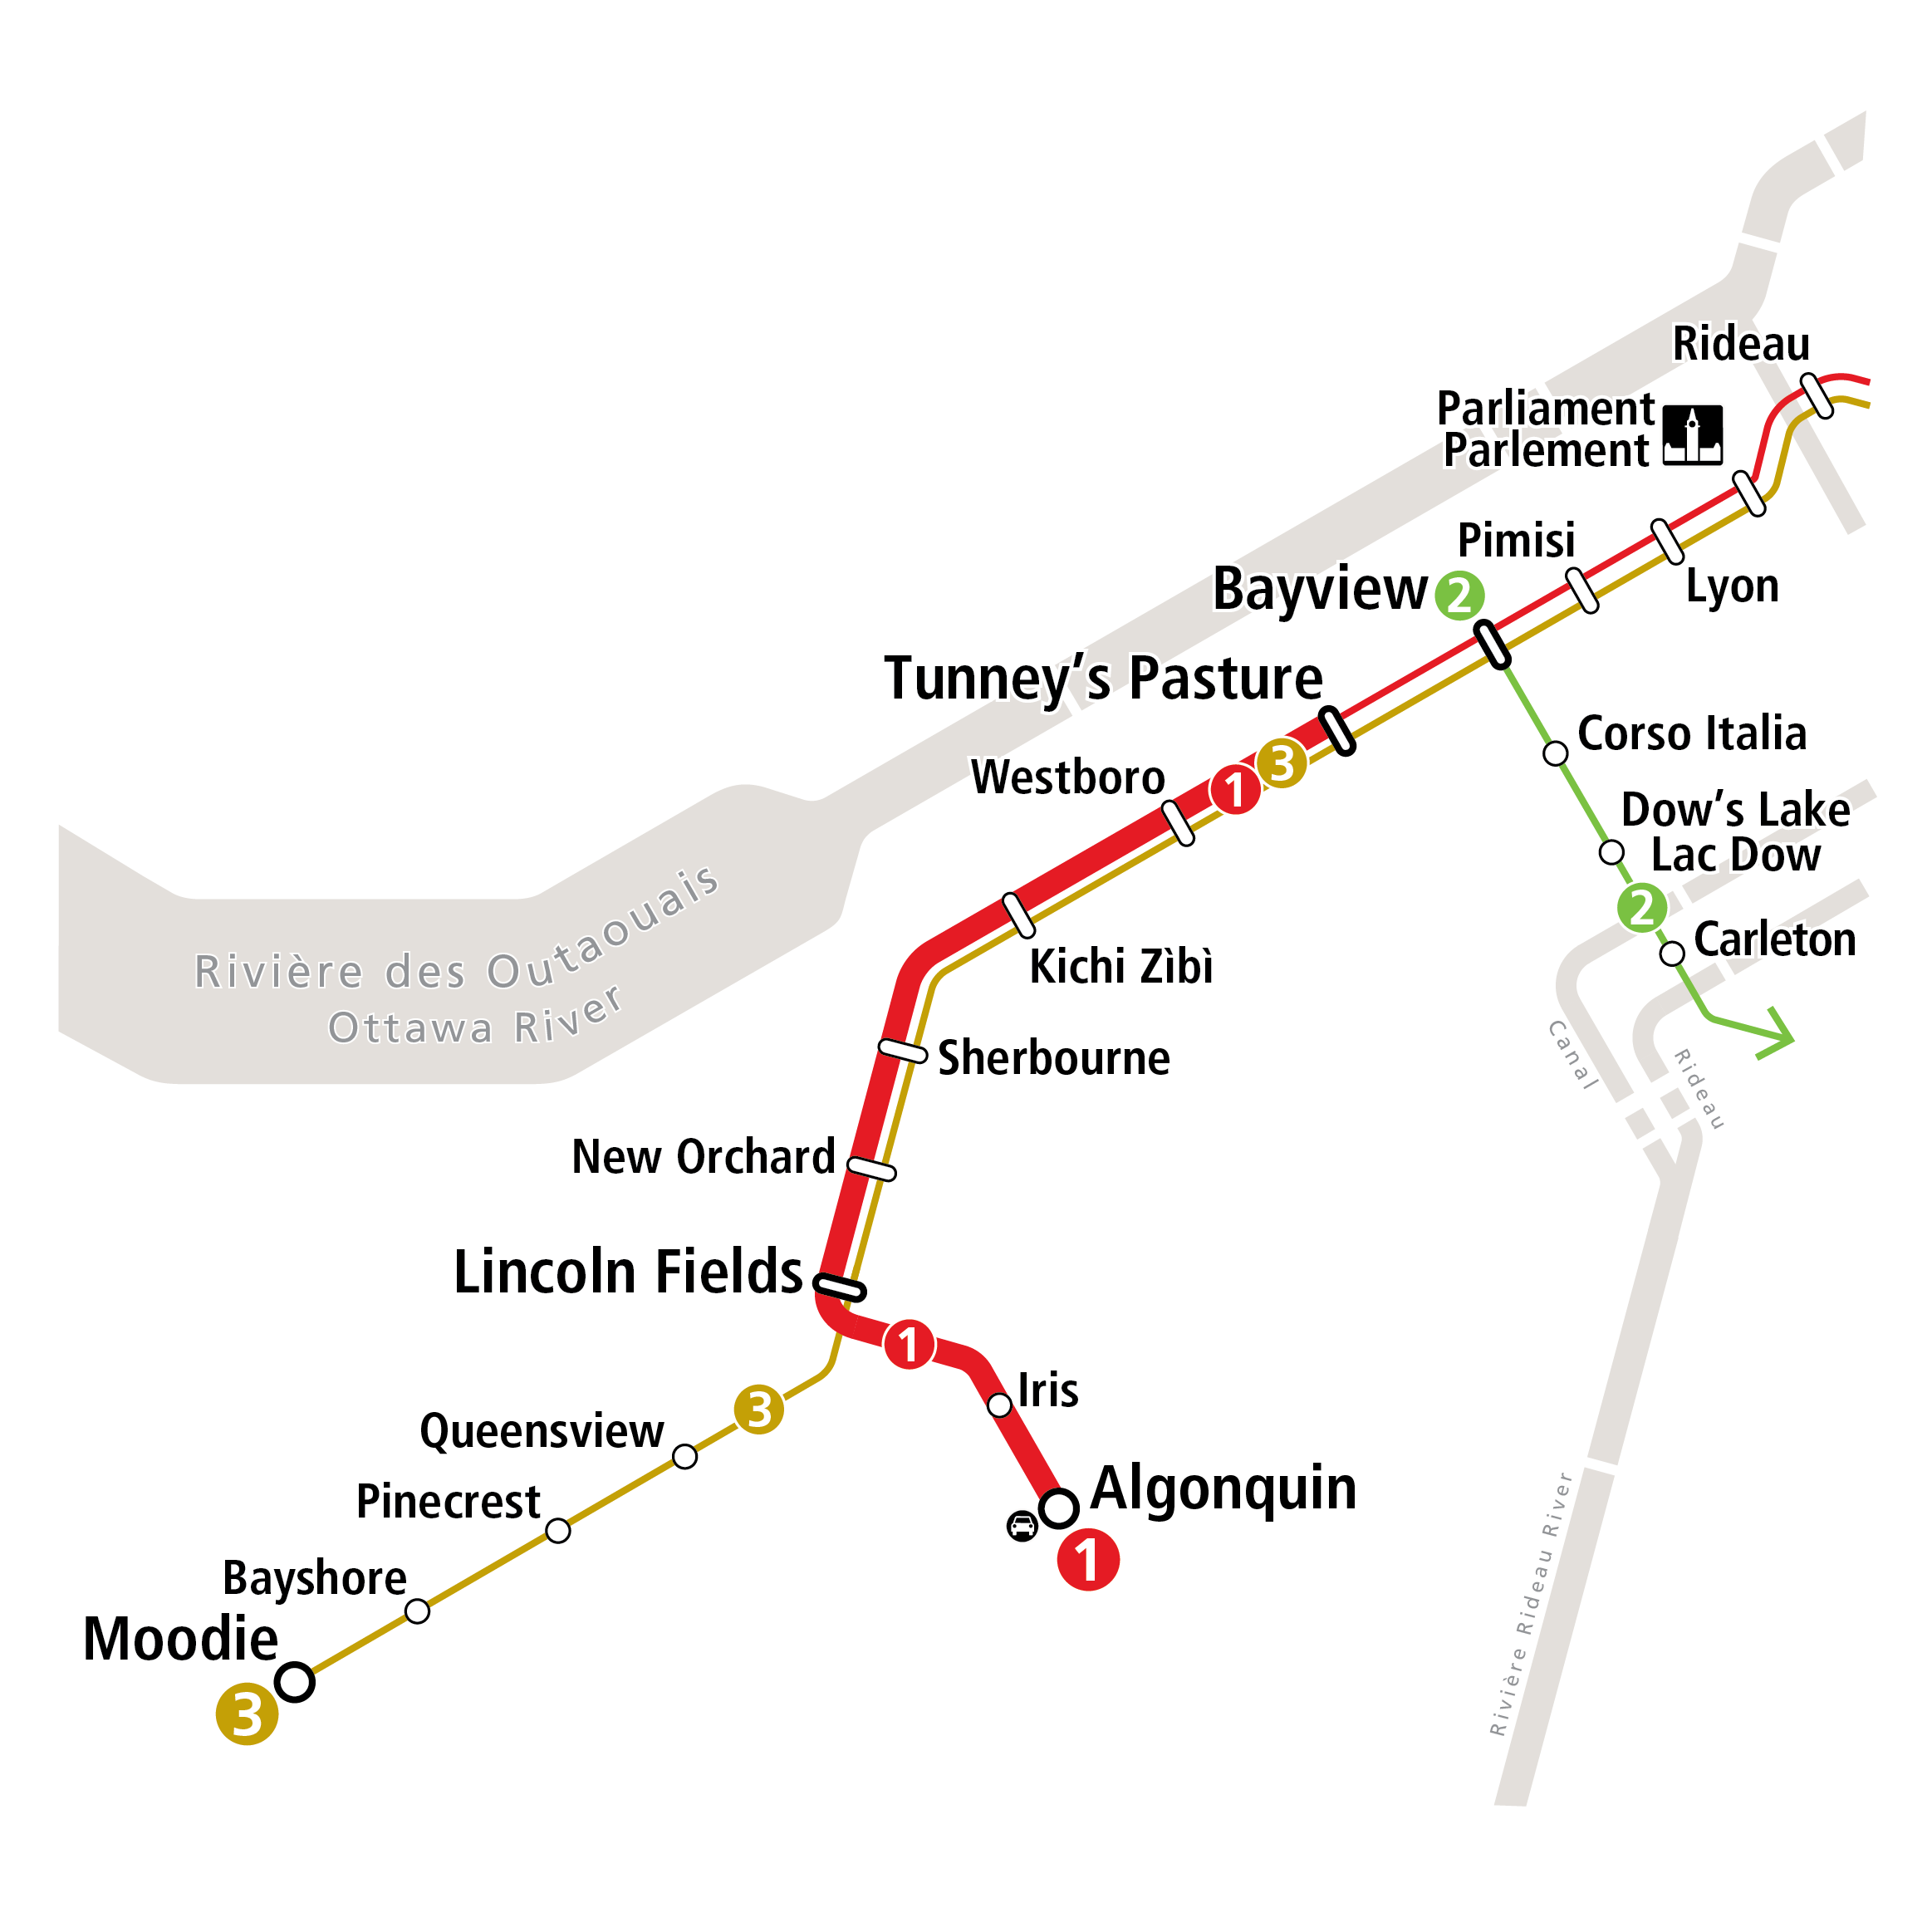 Map of the O-Train line 1 west extension - Tunney’s Pasture to Algonquin